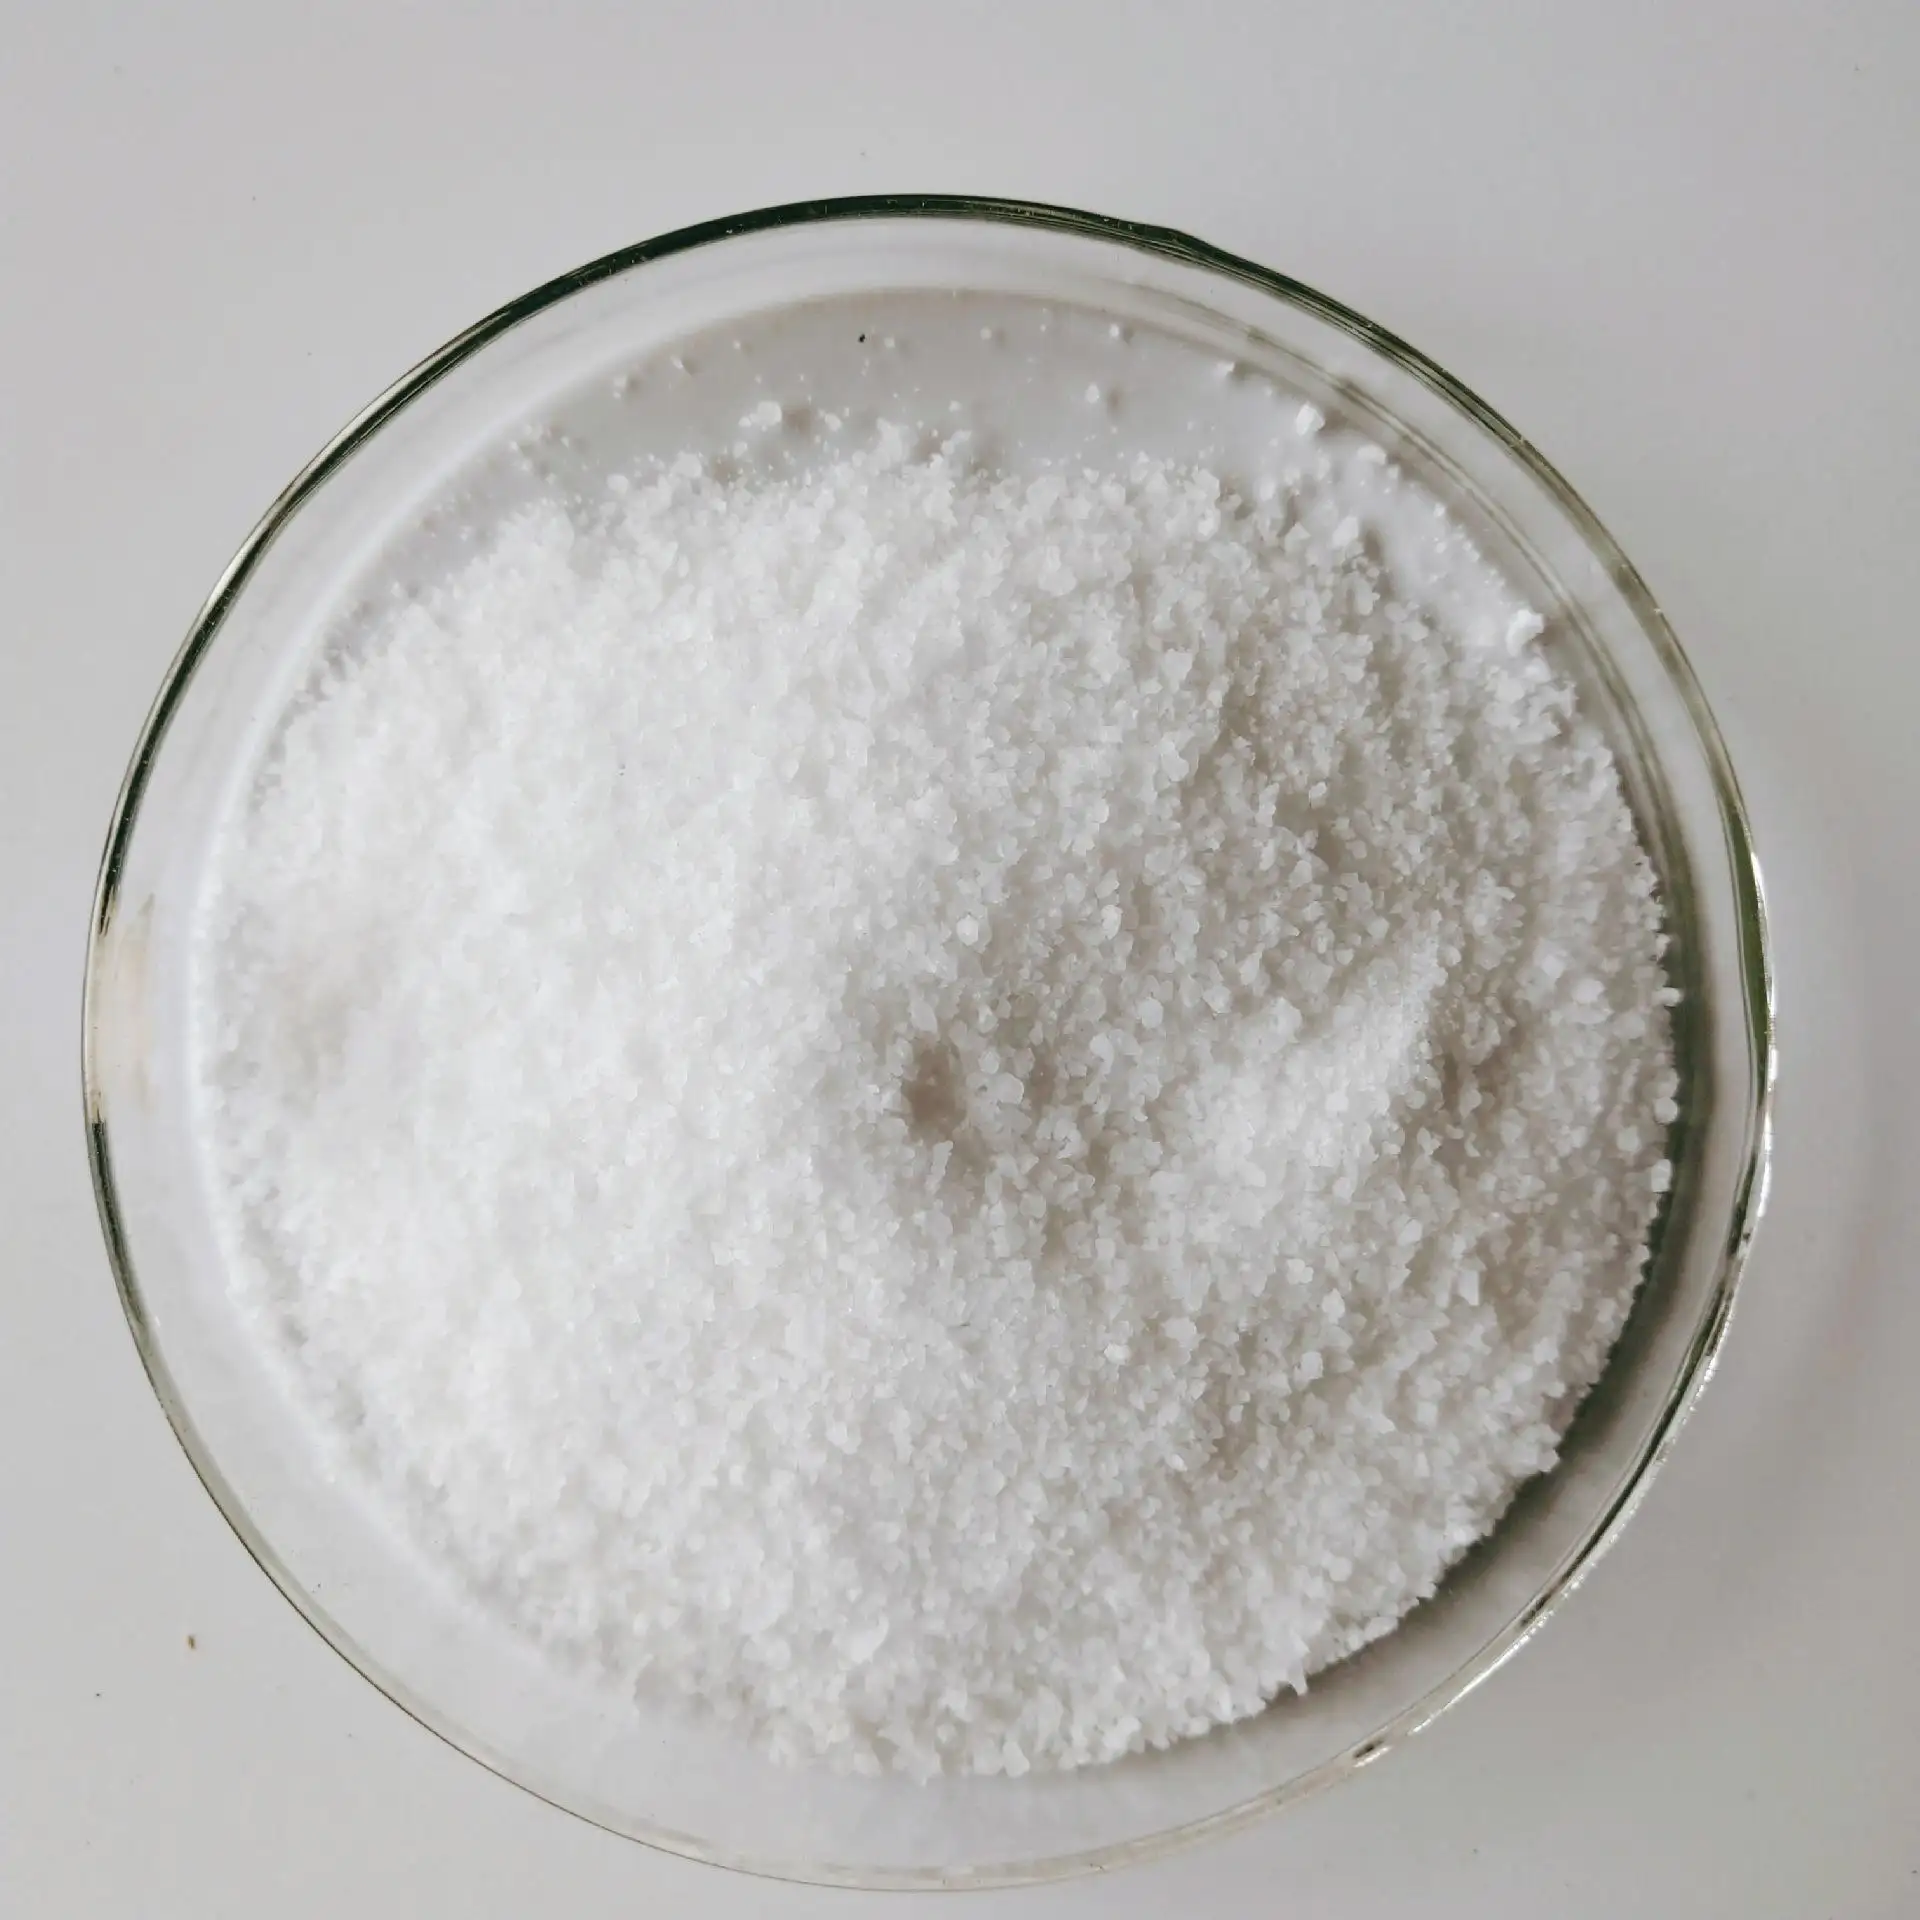 B0412 cationic polyacrylamide cpam hs code 3906901000 po anionic polyacrylamide crystals paper